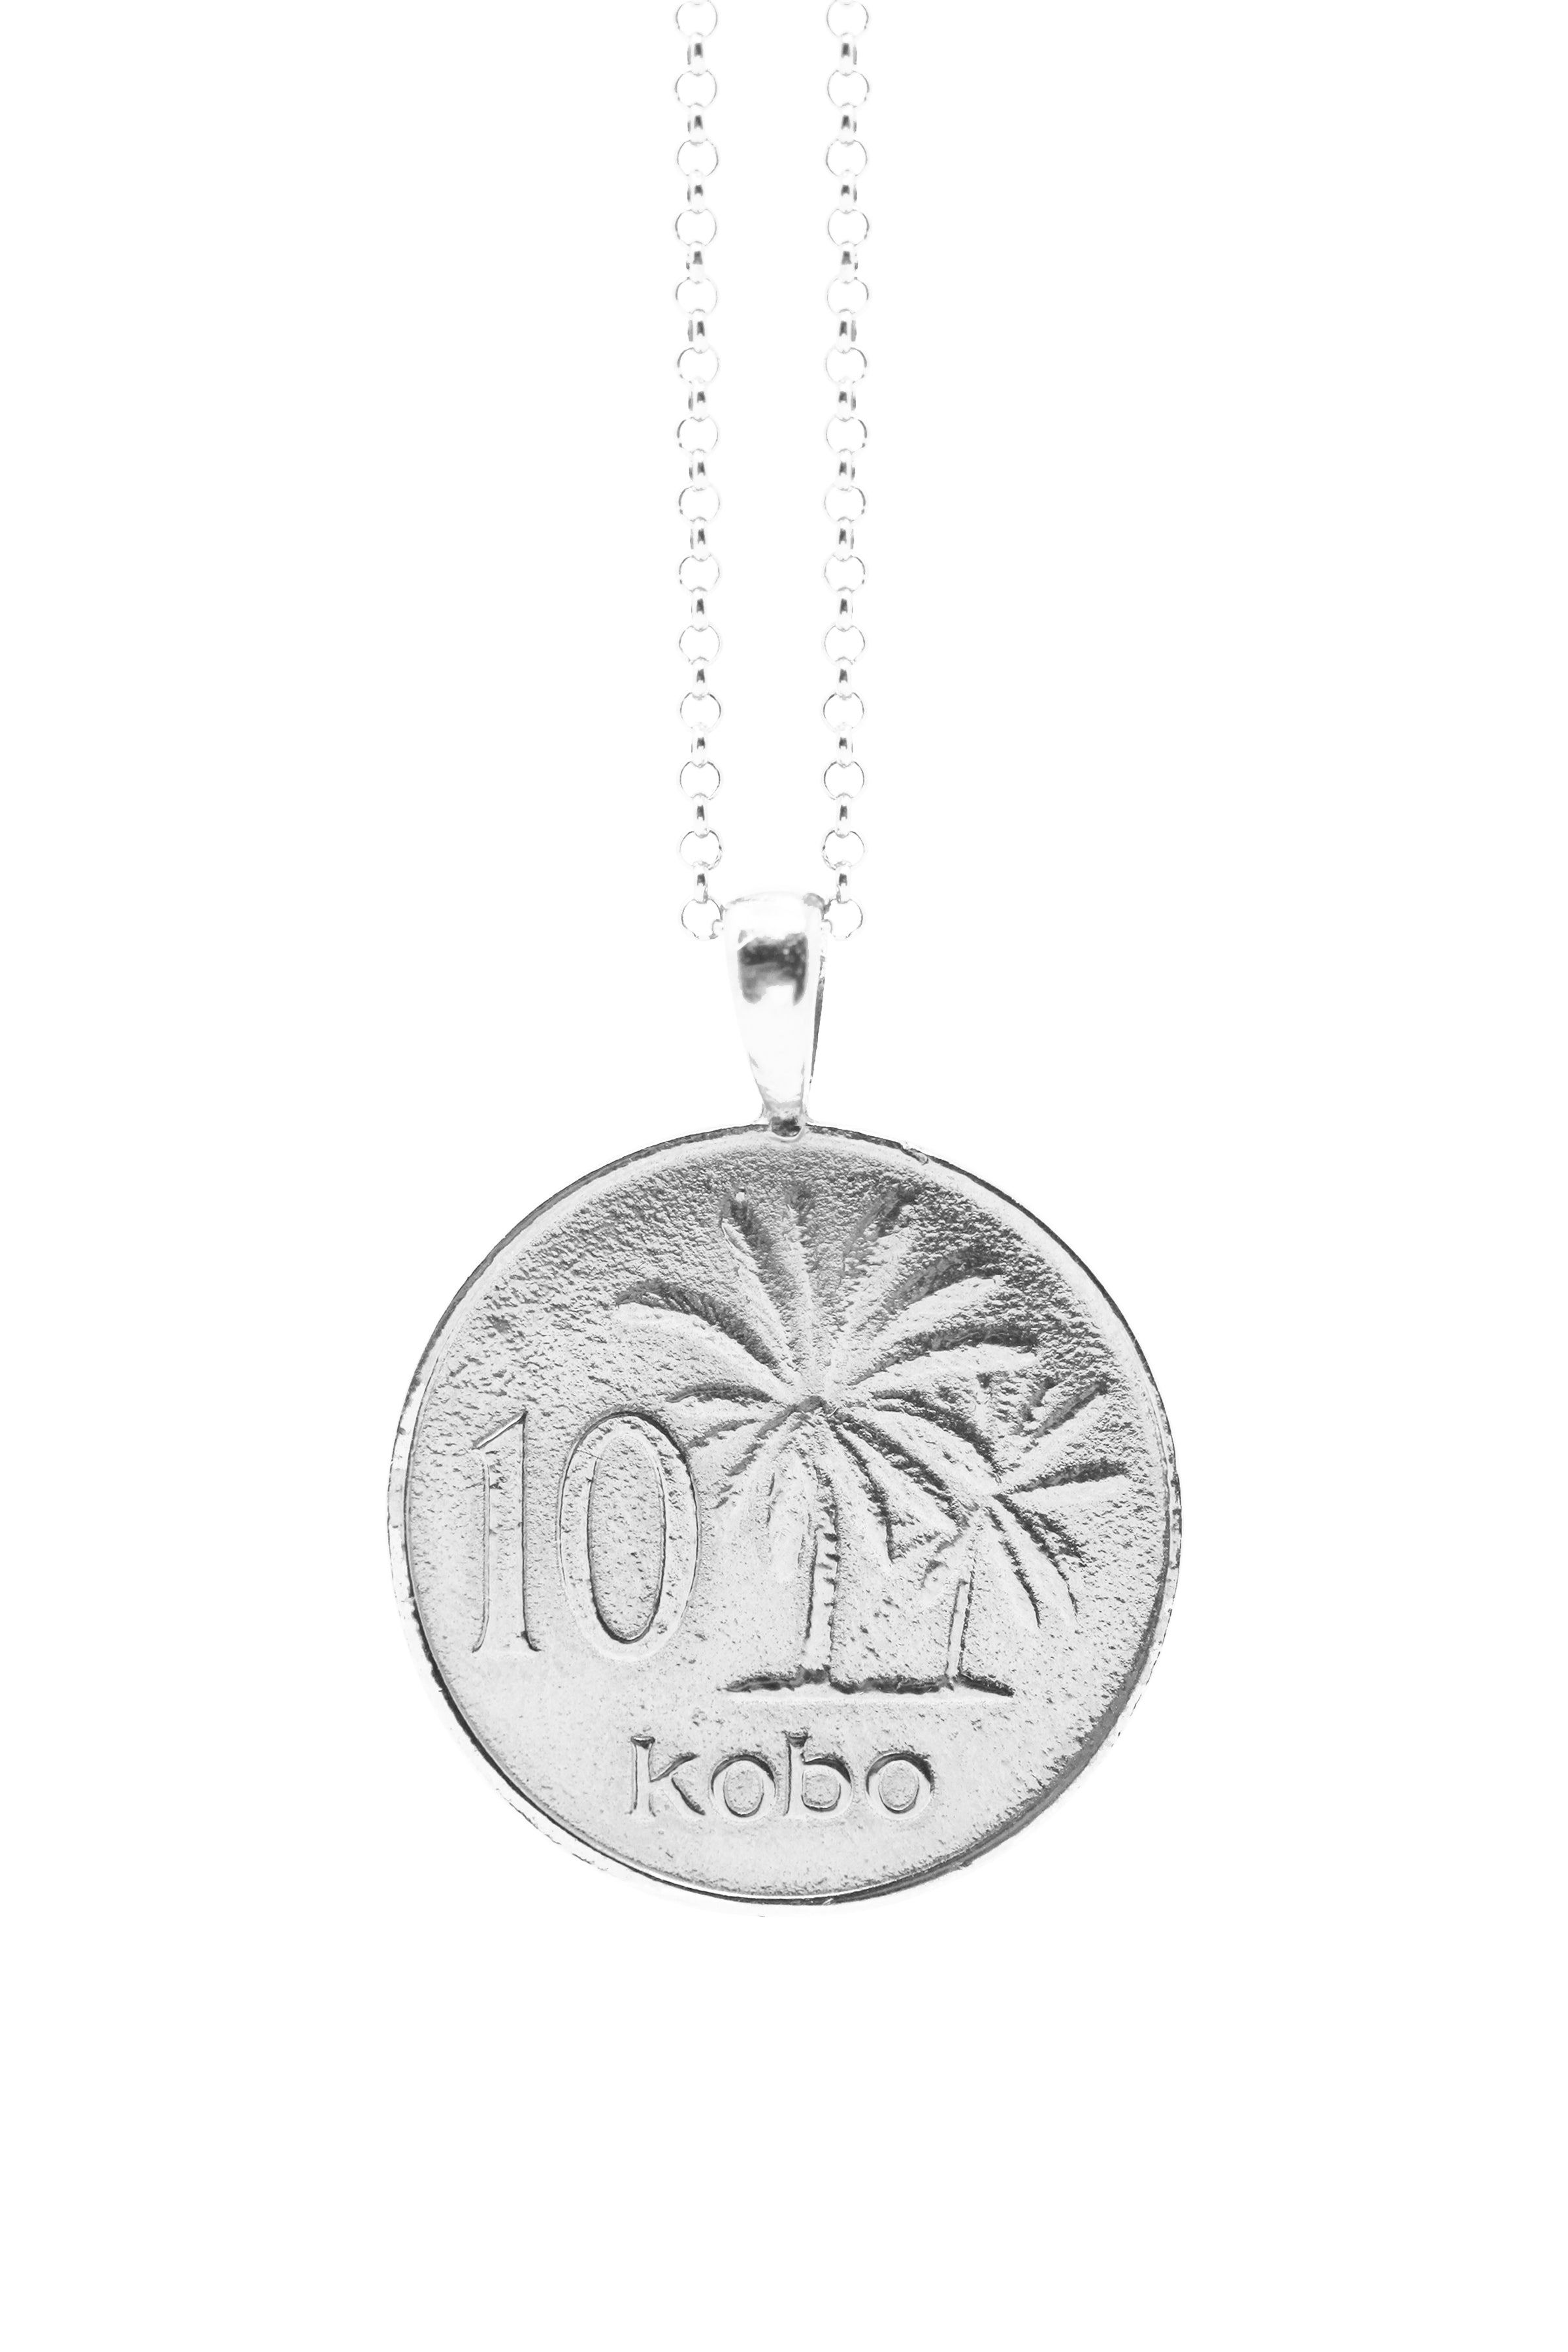 THE NIGERIA Crest and Palm Coin Necklace